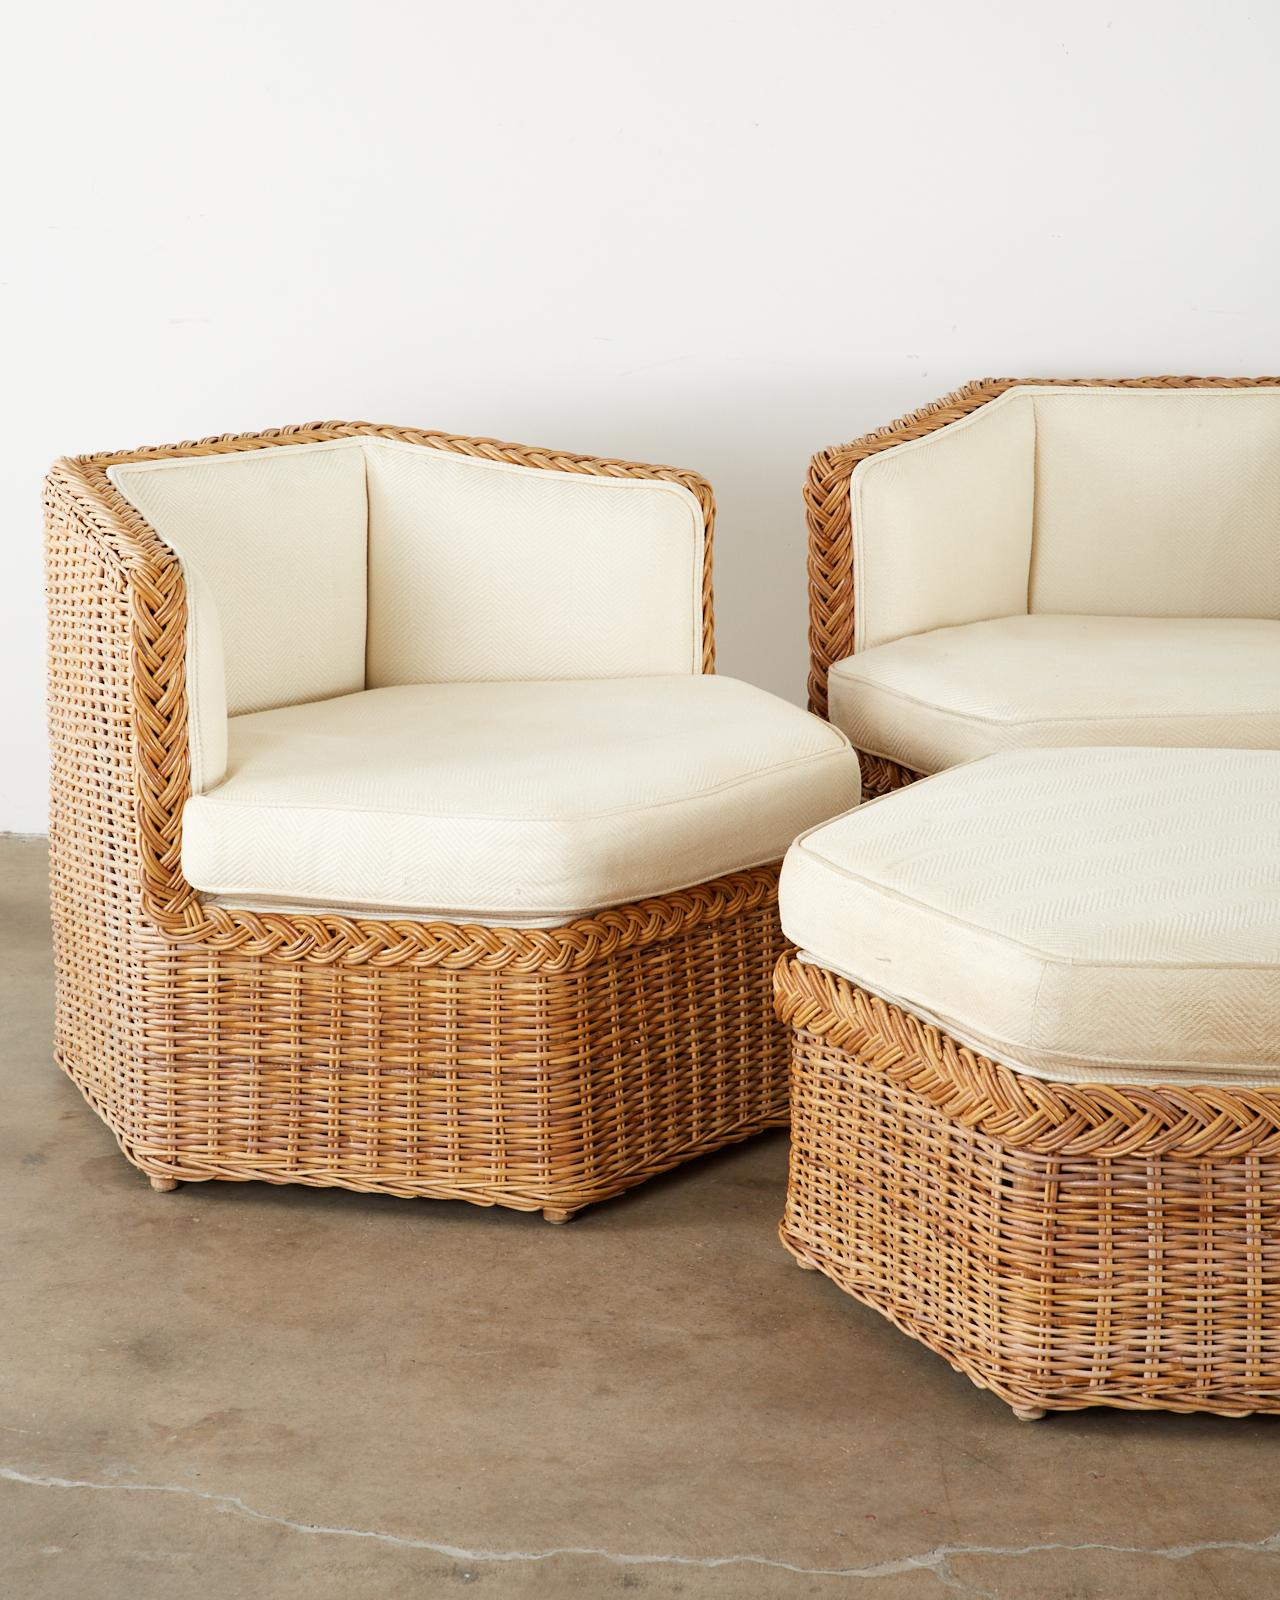 Stylish modular seating sofa set or suite consisting of three hexagonal shaped lounge chairs and a conforming ottoman. Handcrafted from woven rattan wicker in the manner and style of Michael Taylor. Topped with off-white thick cushions and padded